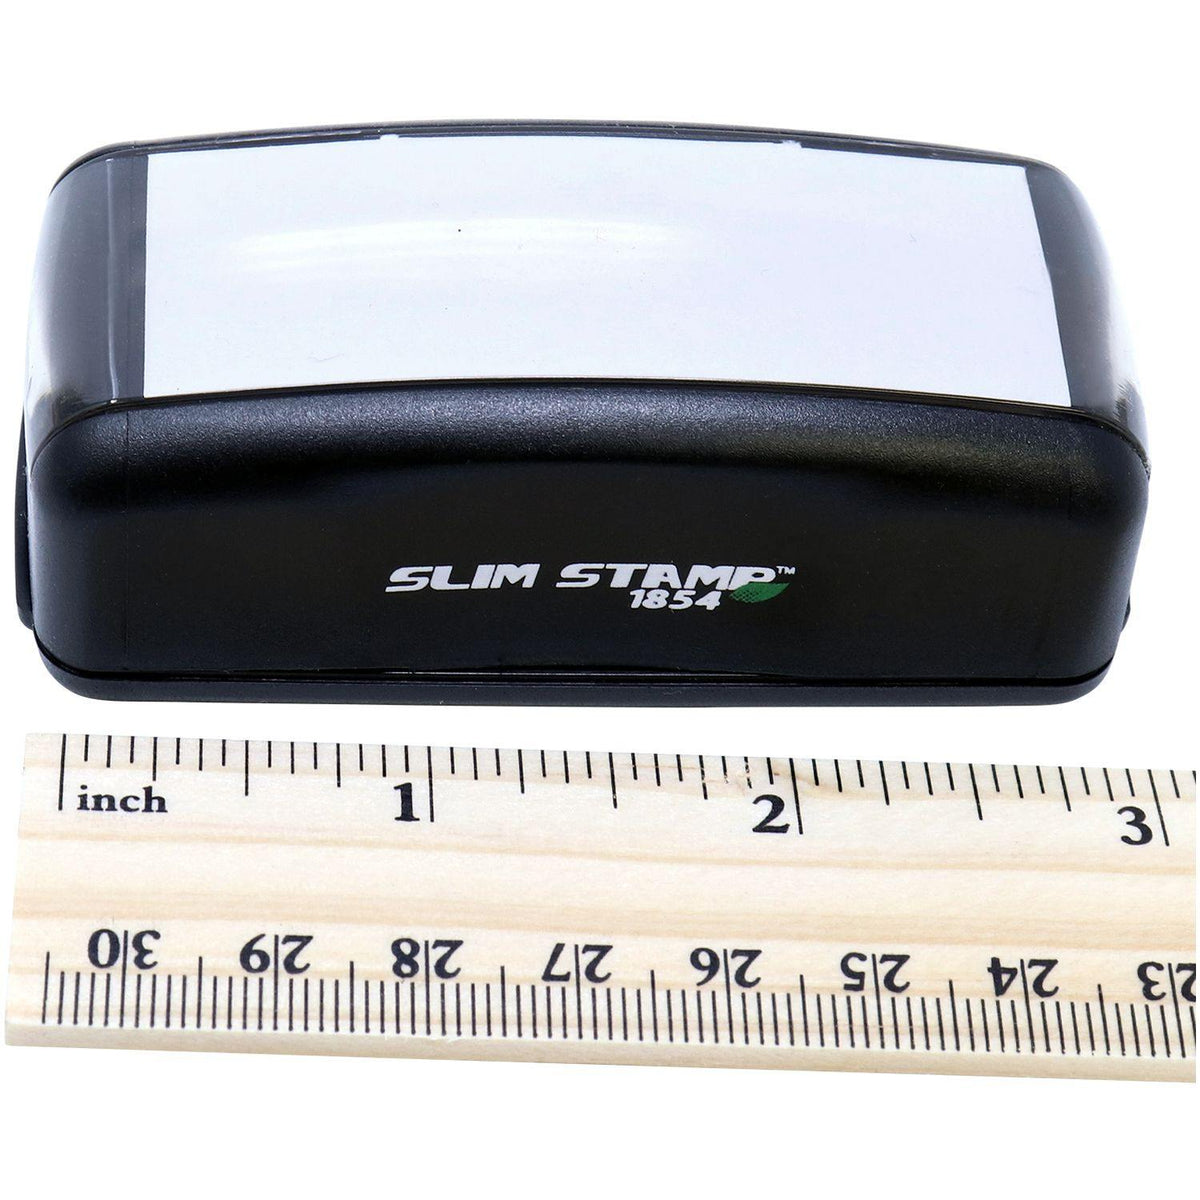 Measurement Large Pre-Inked Skinny Rush Stamp with Ruler